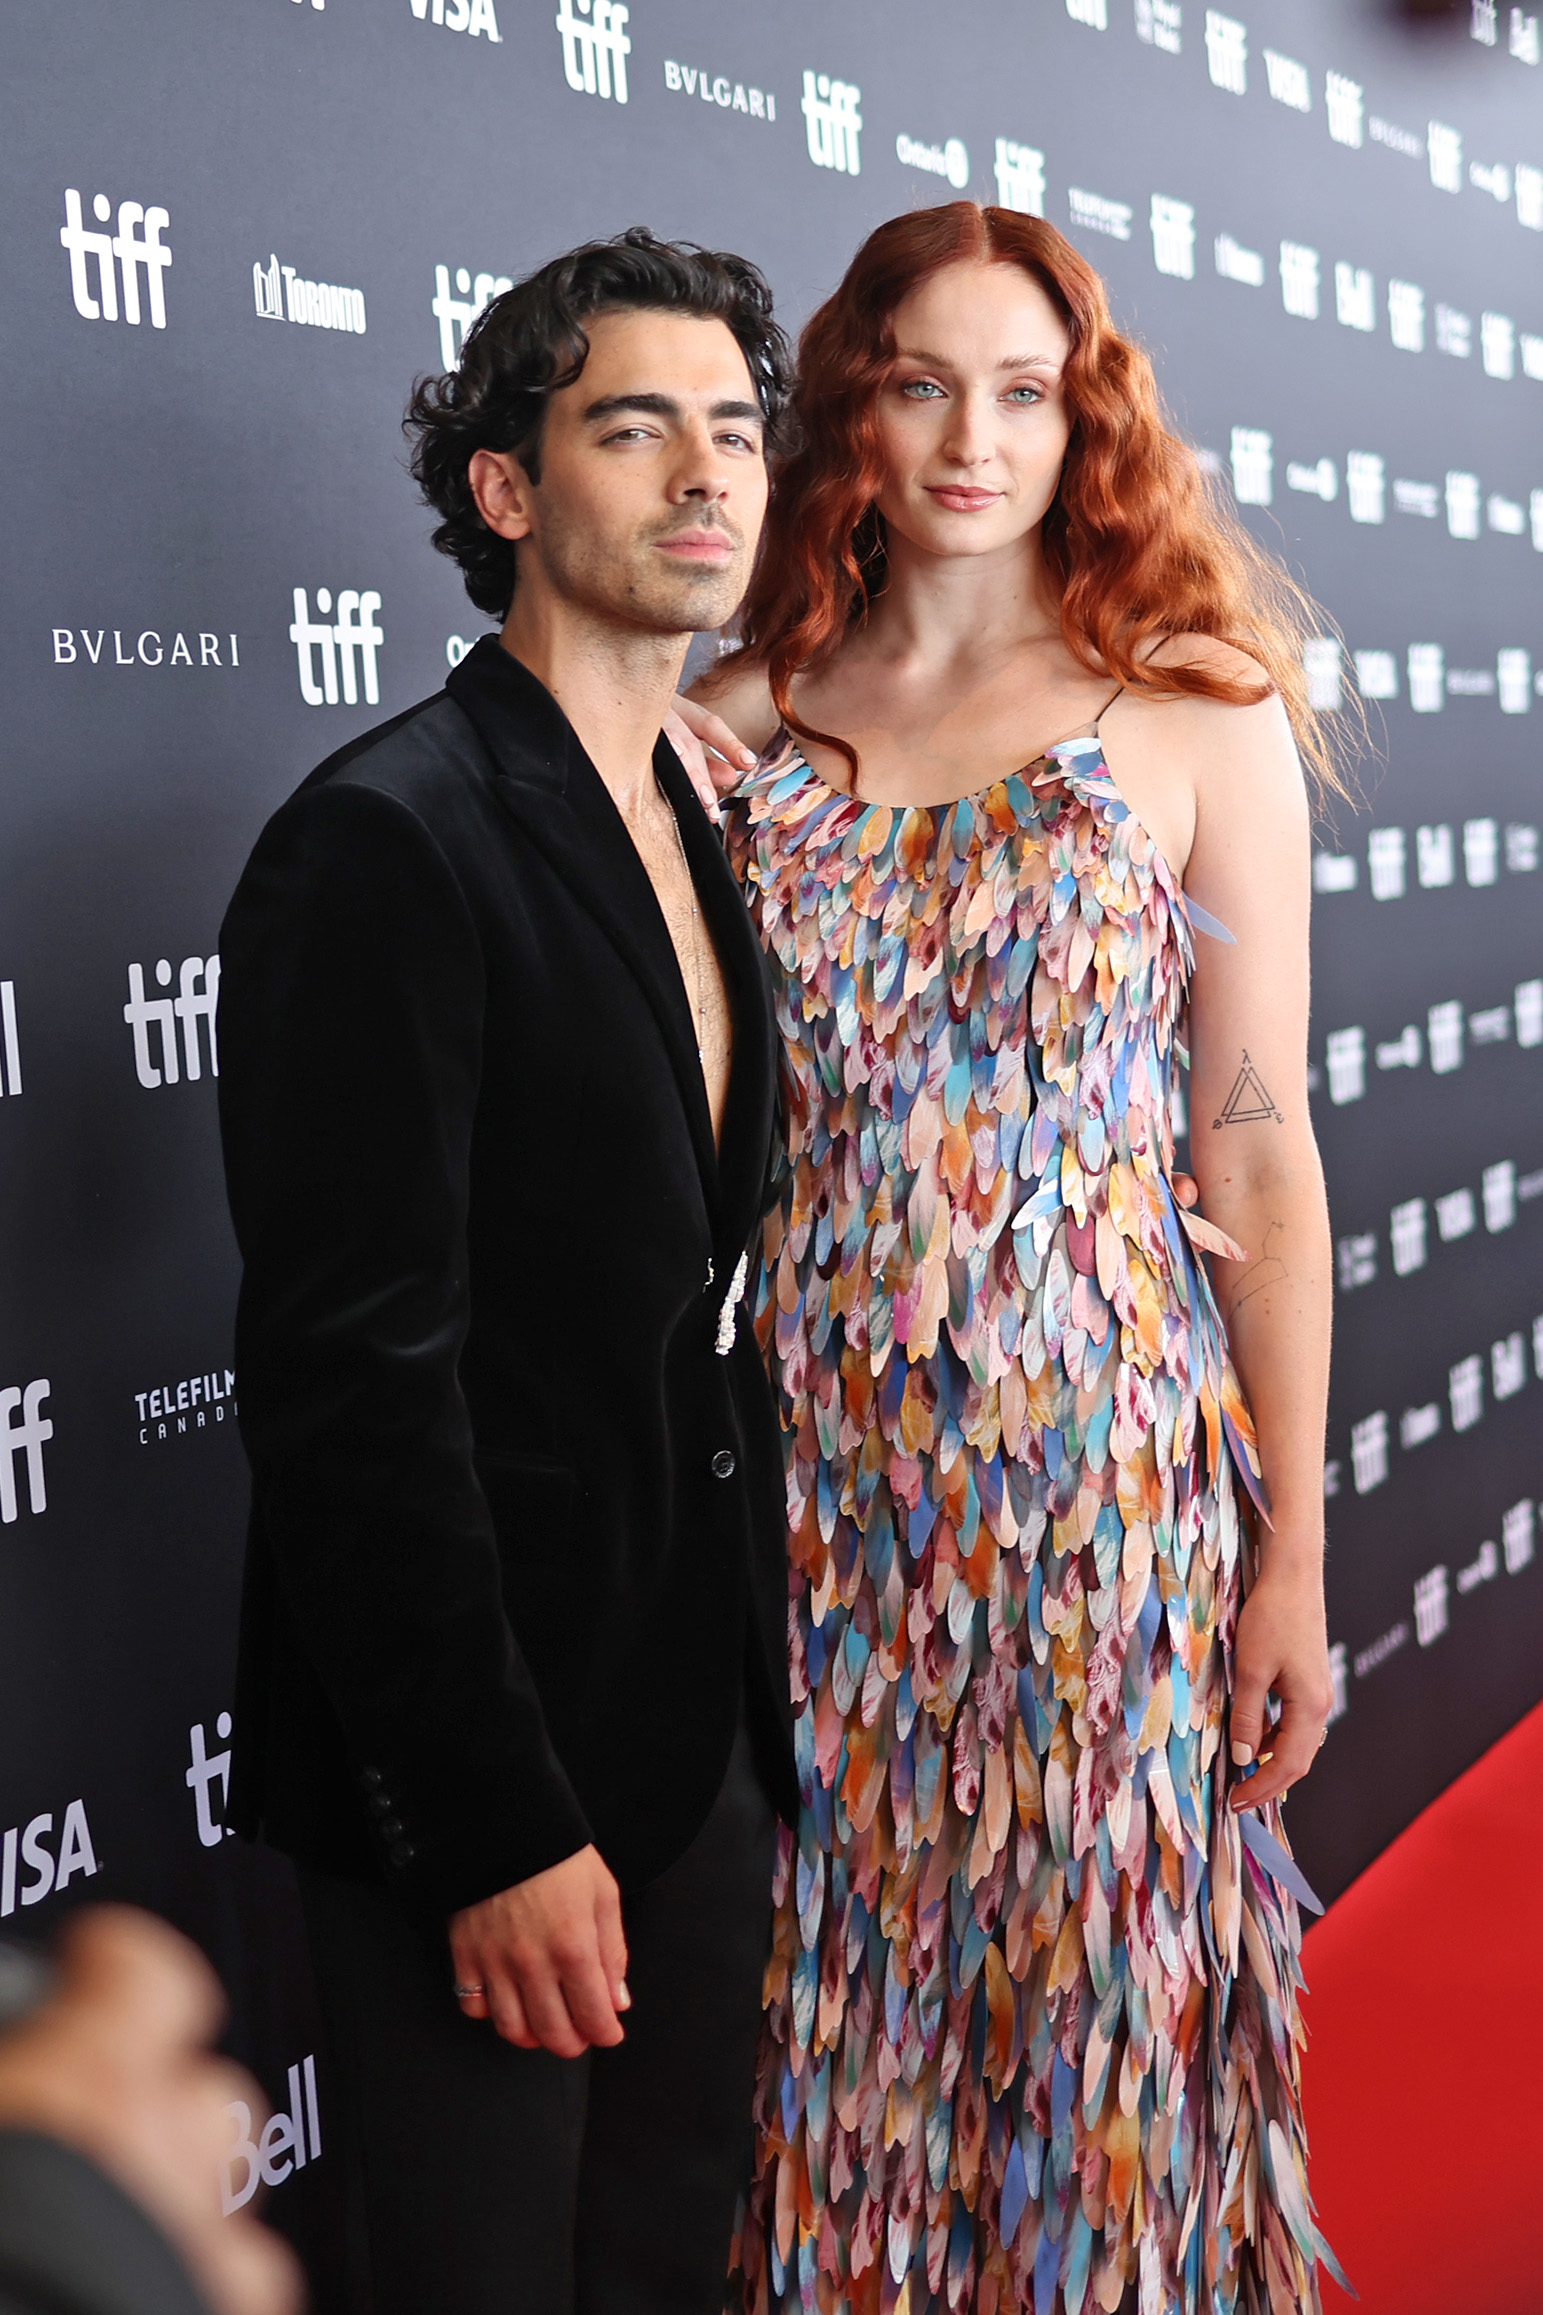 the couple on the red carpet